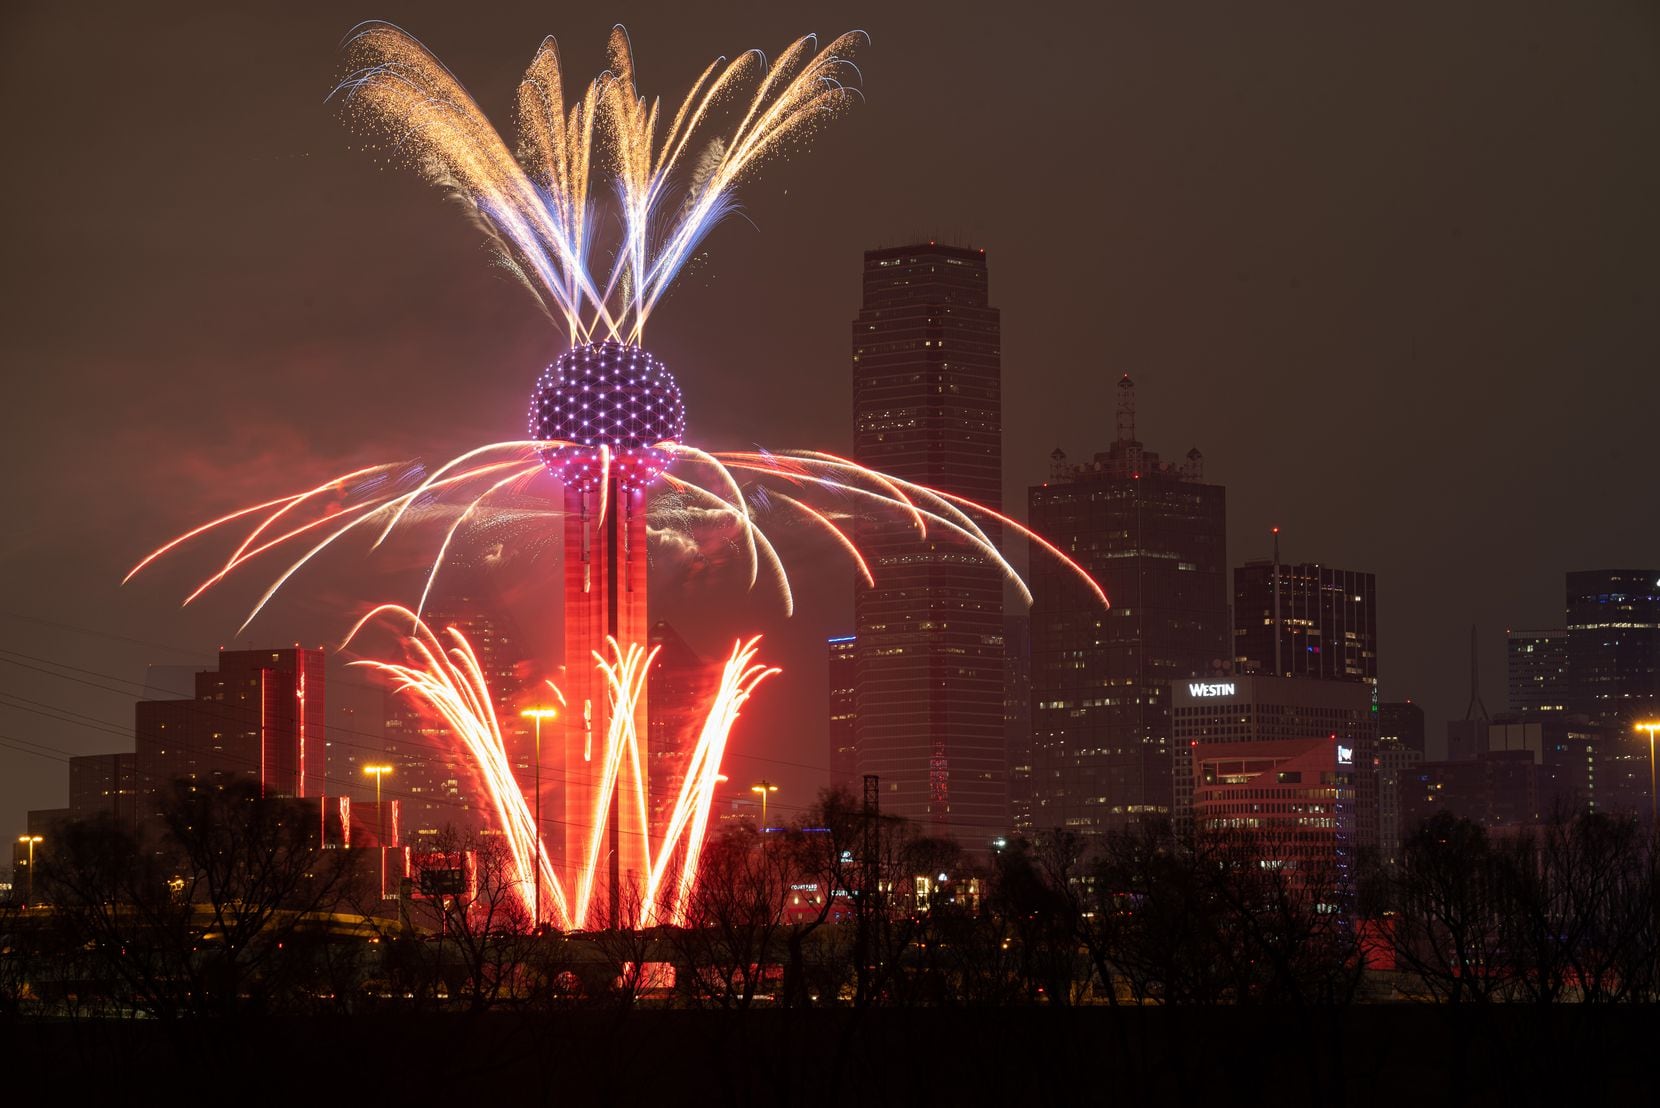 Photos Fireworks light up Dallas, Reunion Tower in 2022 New Year